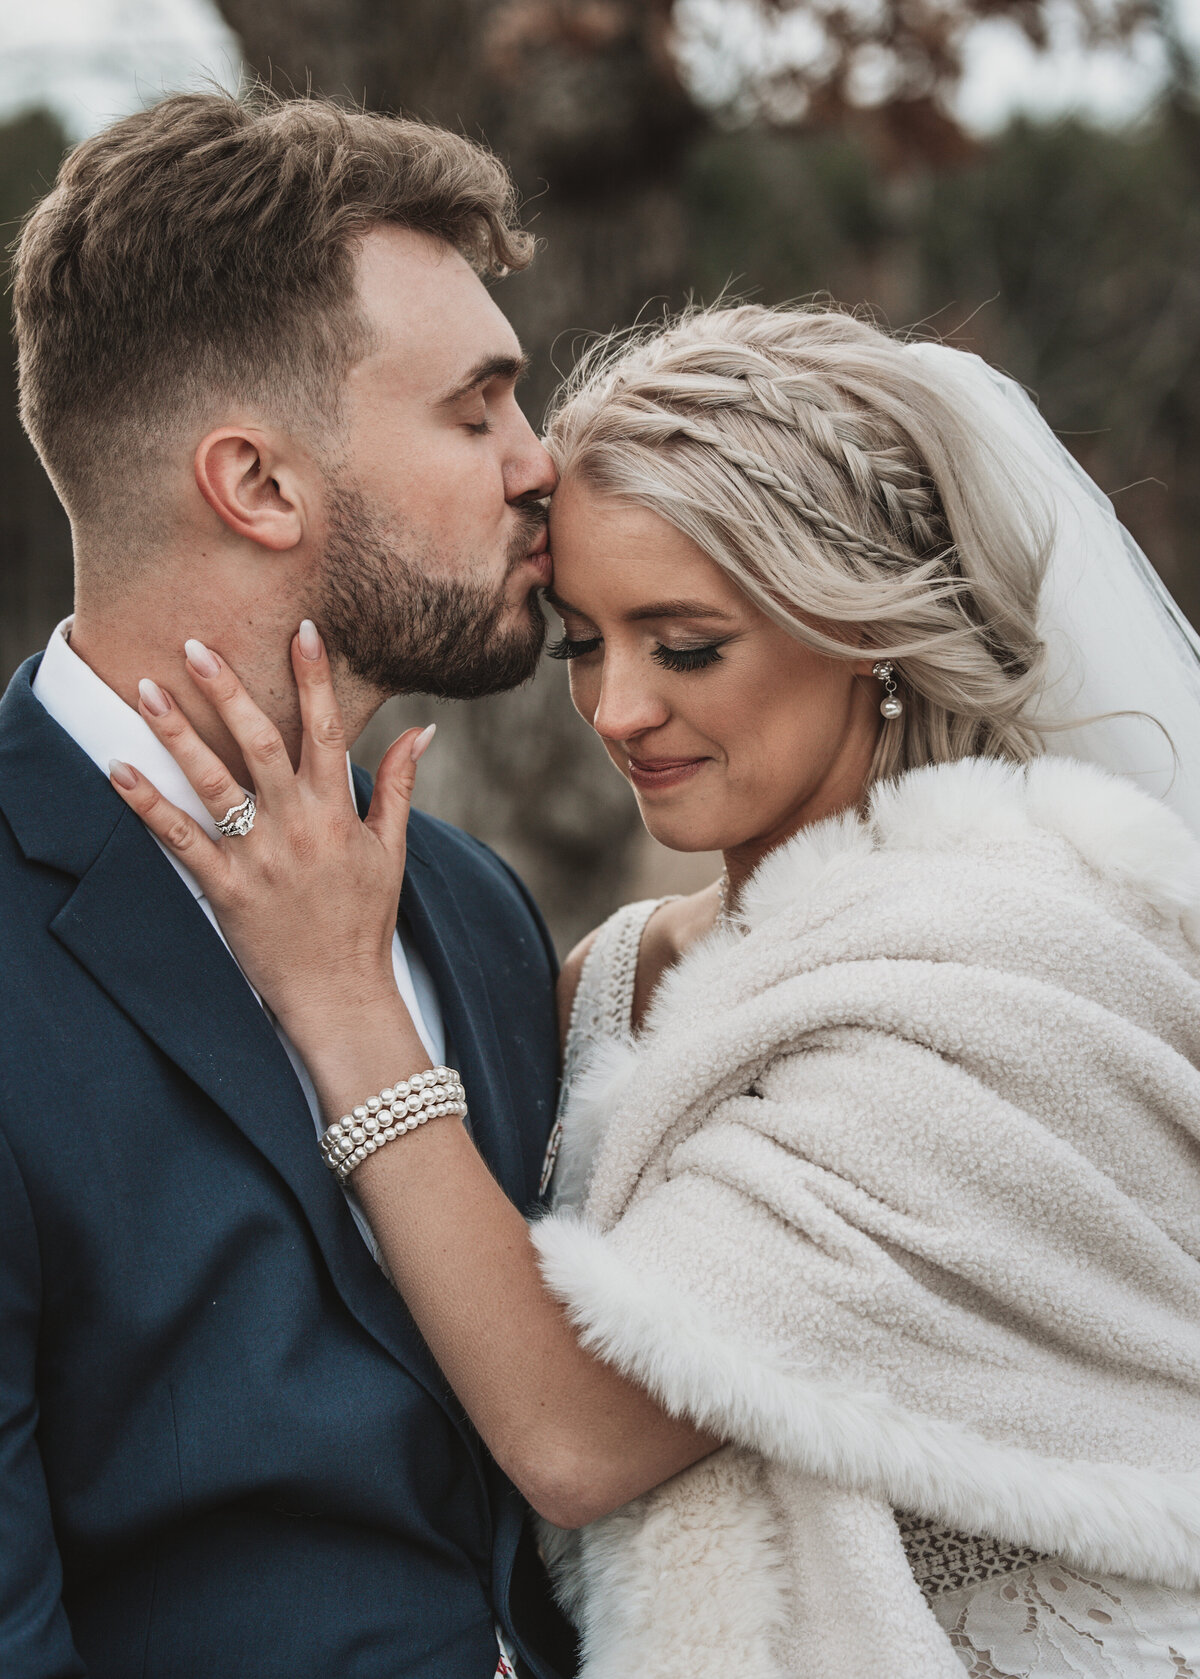 A tender moment between bride and groom as they share a gentle kiss, their love and joy palpable amidst the serene backdrop of nature and bride wearing a fur coat taken by jen  Jarmuzek photography a Minneapolis wedding photographer